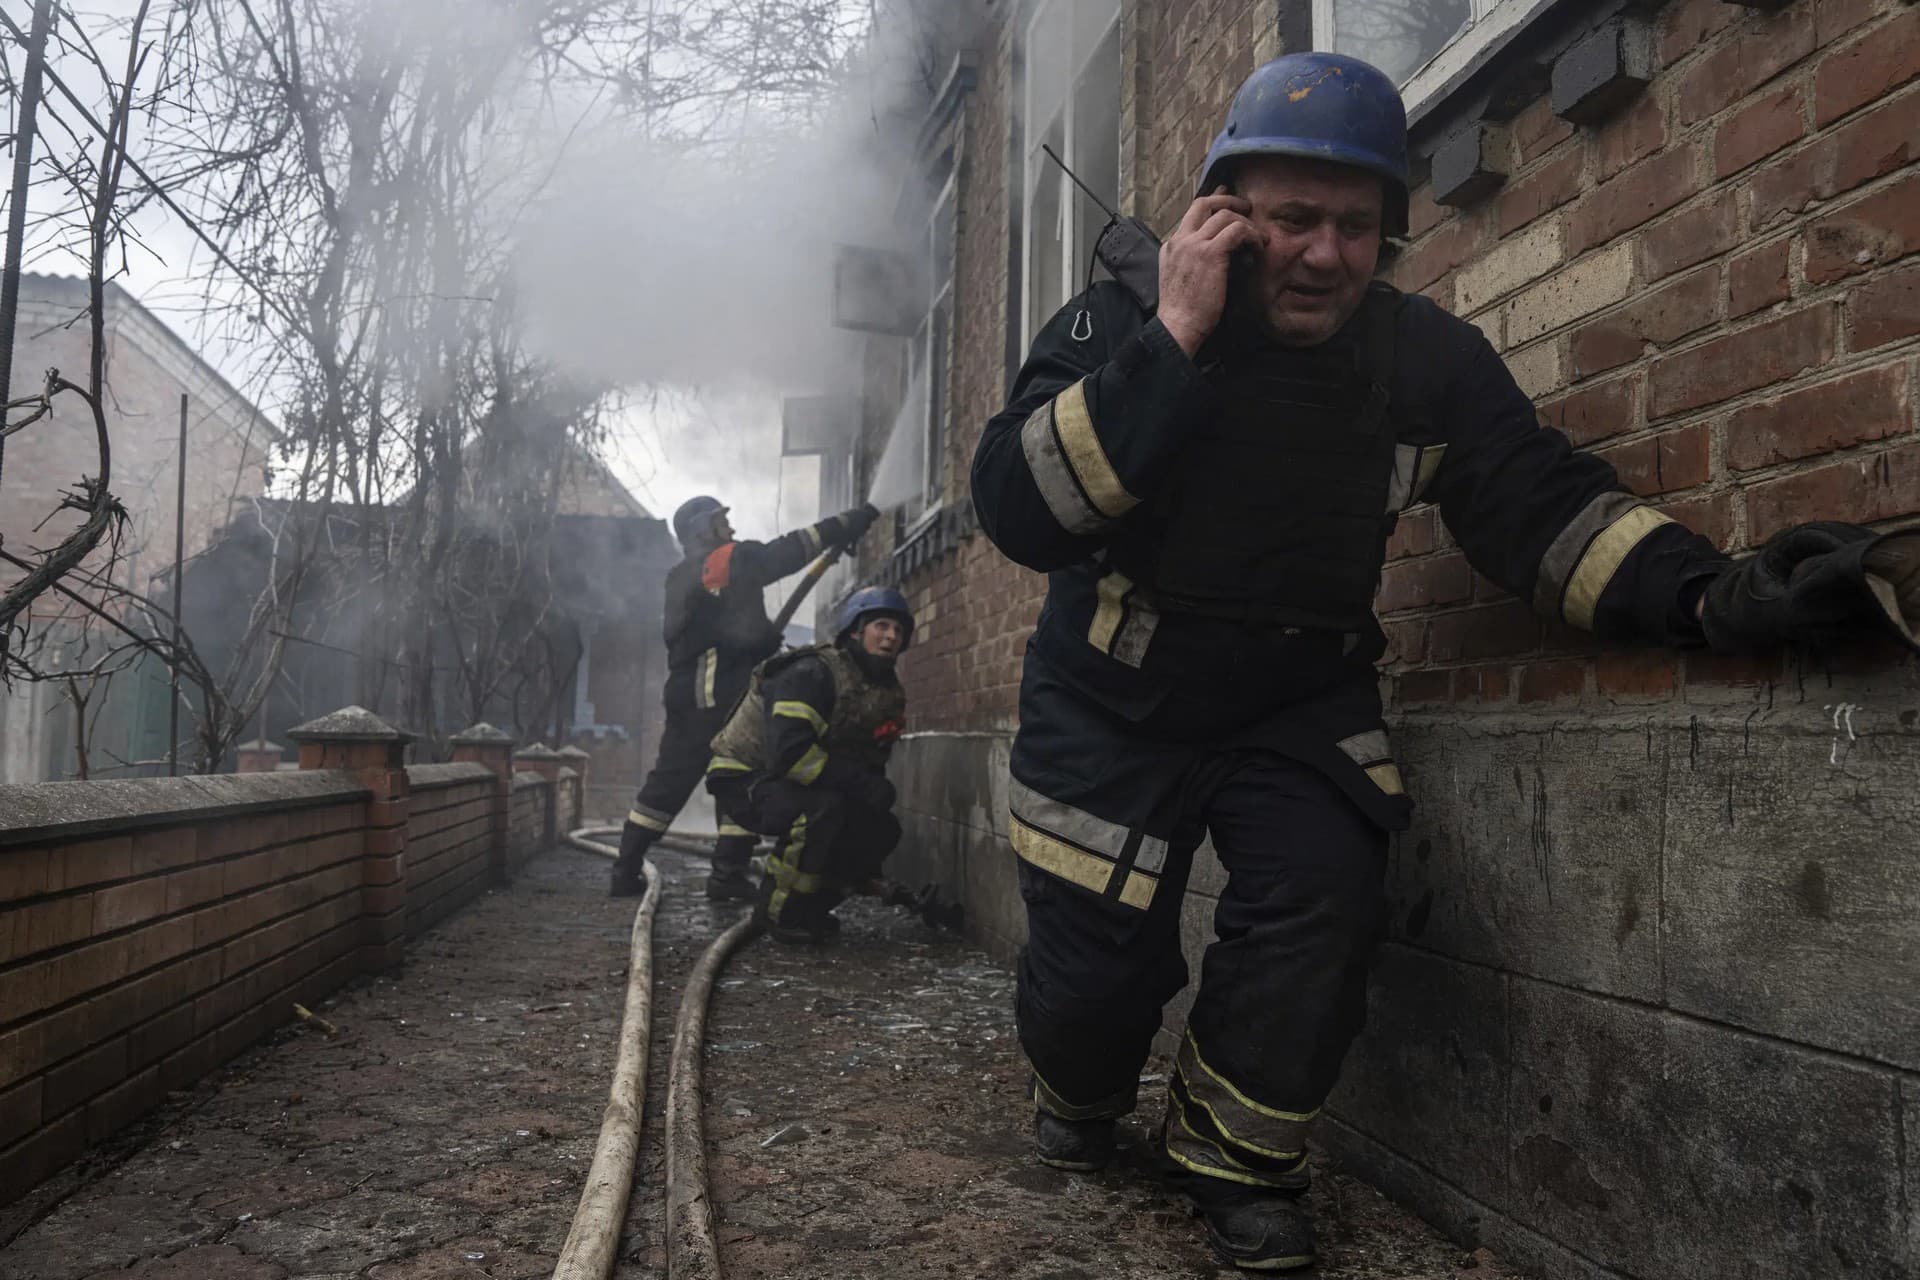 A rescue worker speaks on the phone while his team puts out a fire in a house which was shelled by Russian forces at the residential neighbourhood in Kostiantynivka